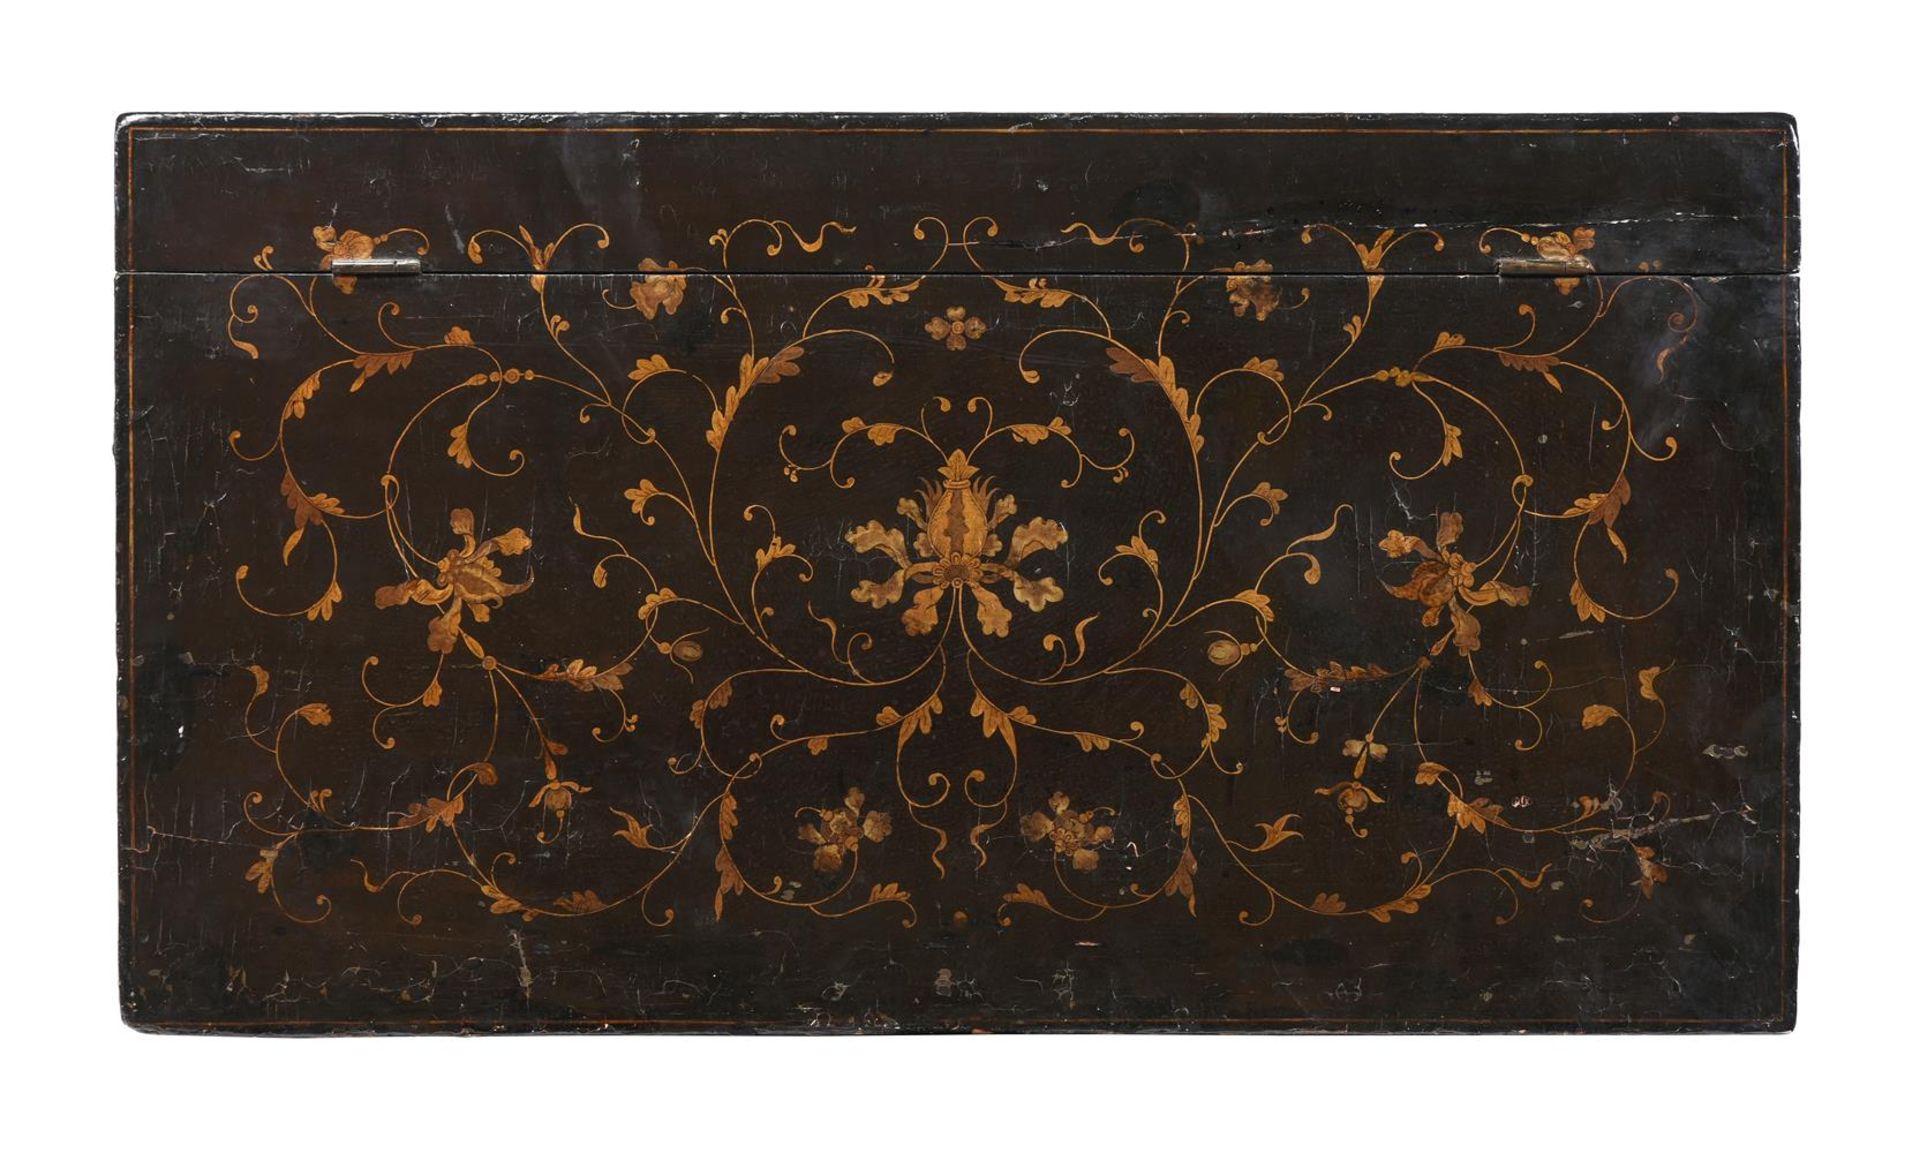 A CHINESE EXPORT BLACK LACQUER AND GILT DECORATED CHEST, LATE 18TH OR EARLY 19TH CENTURY - Image 3 of 4